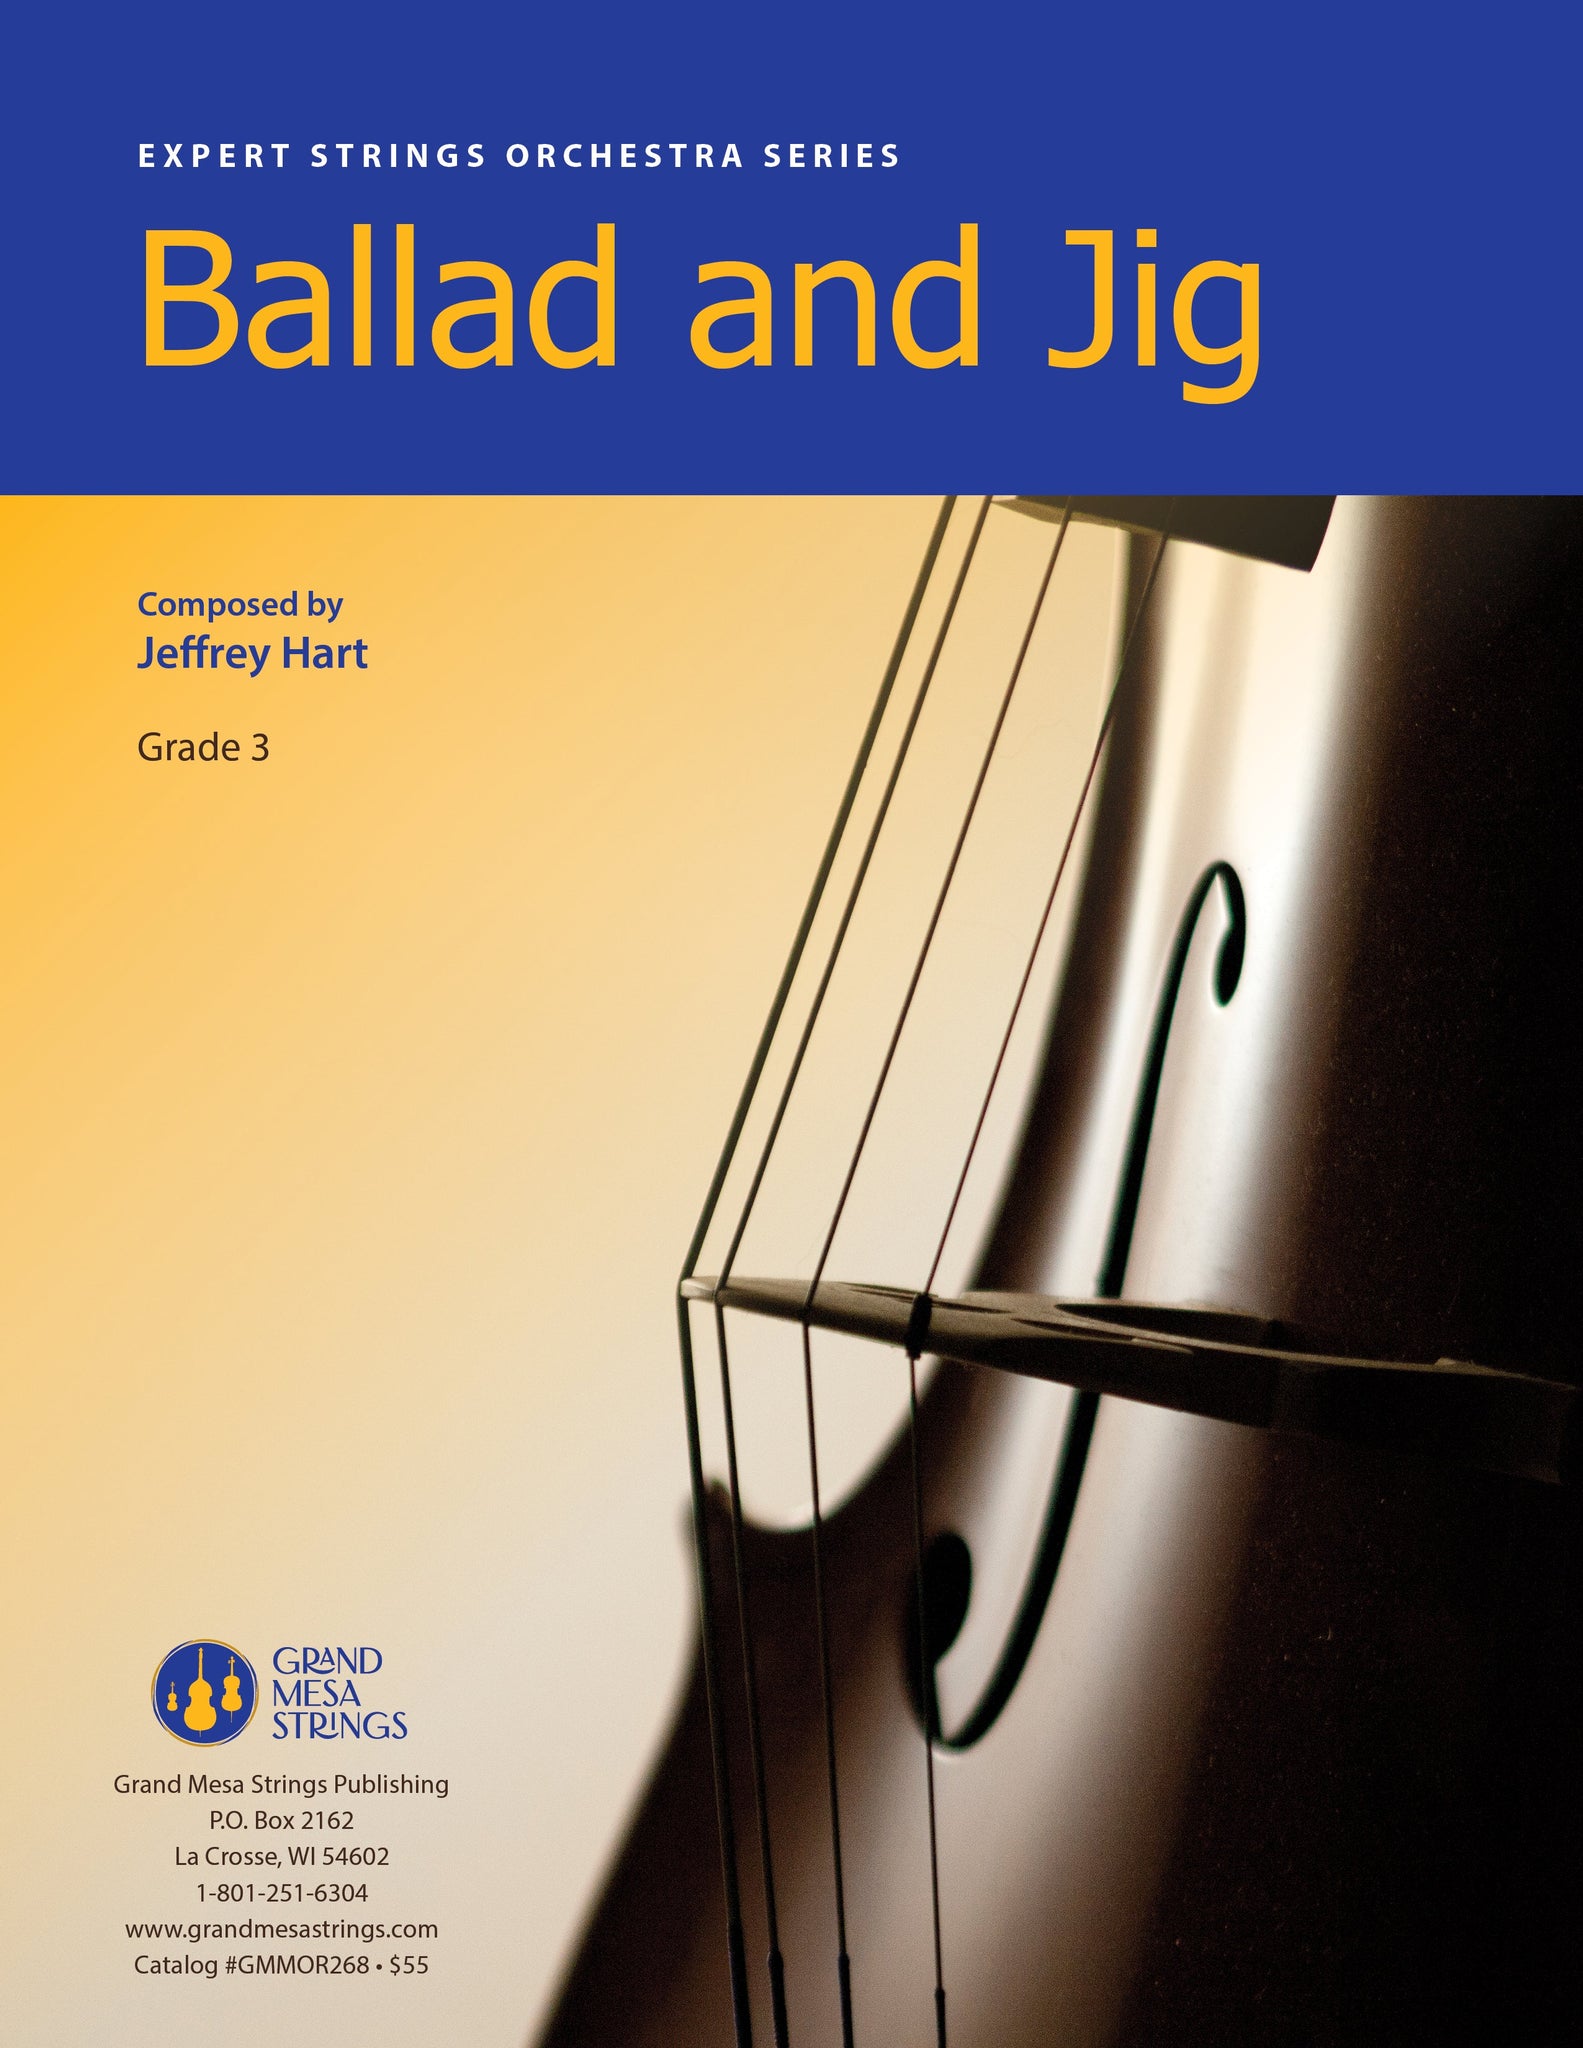 Strings sheet music cover of Ballad and Jig, composed by Jeffrey Hart.